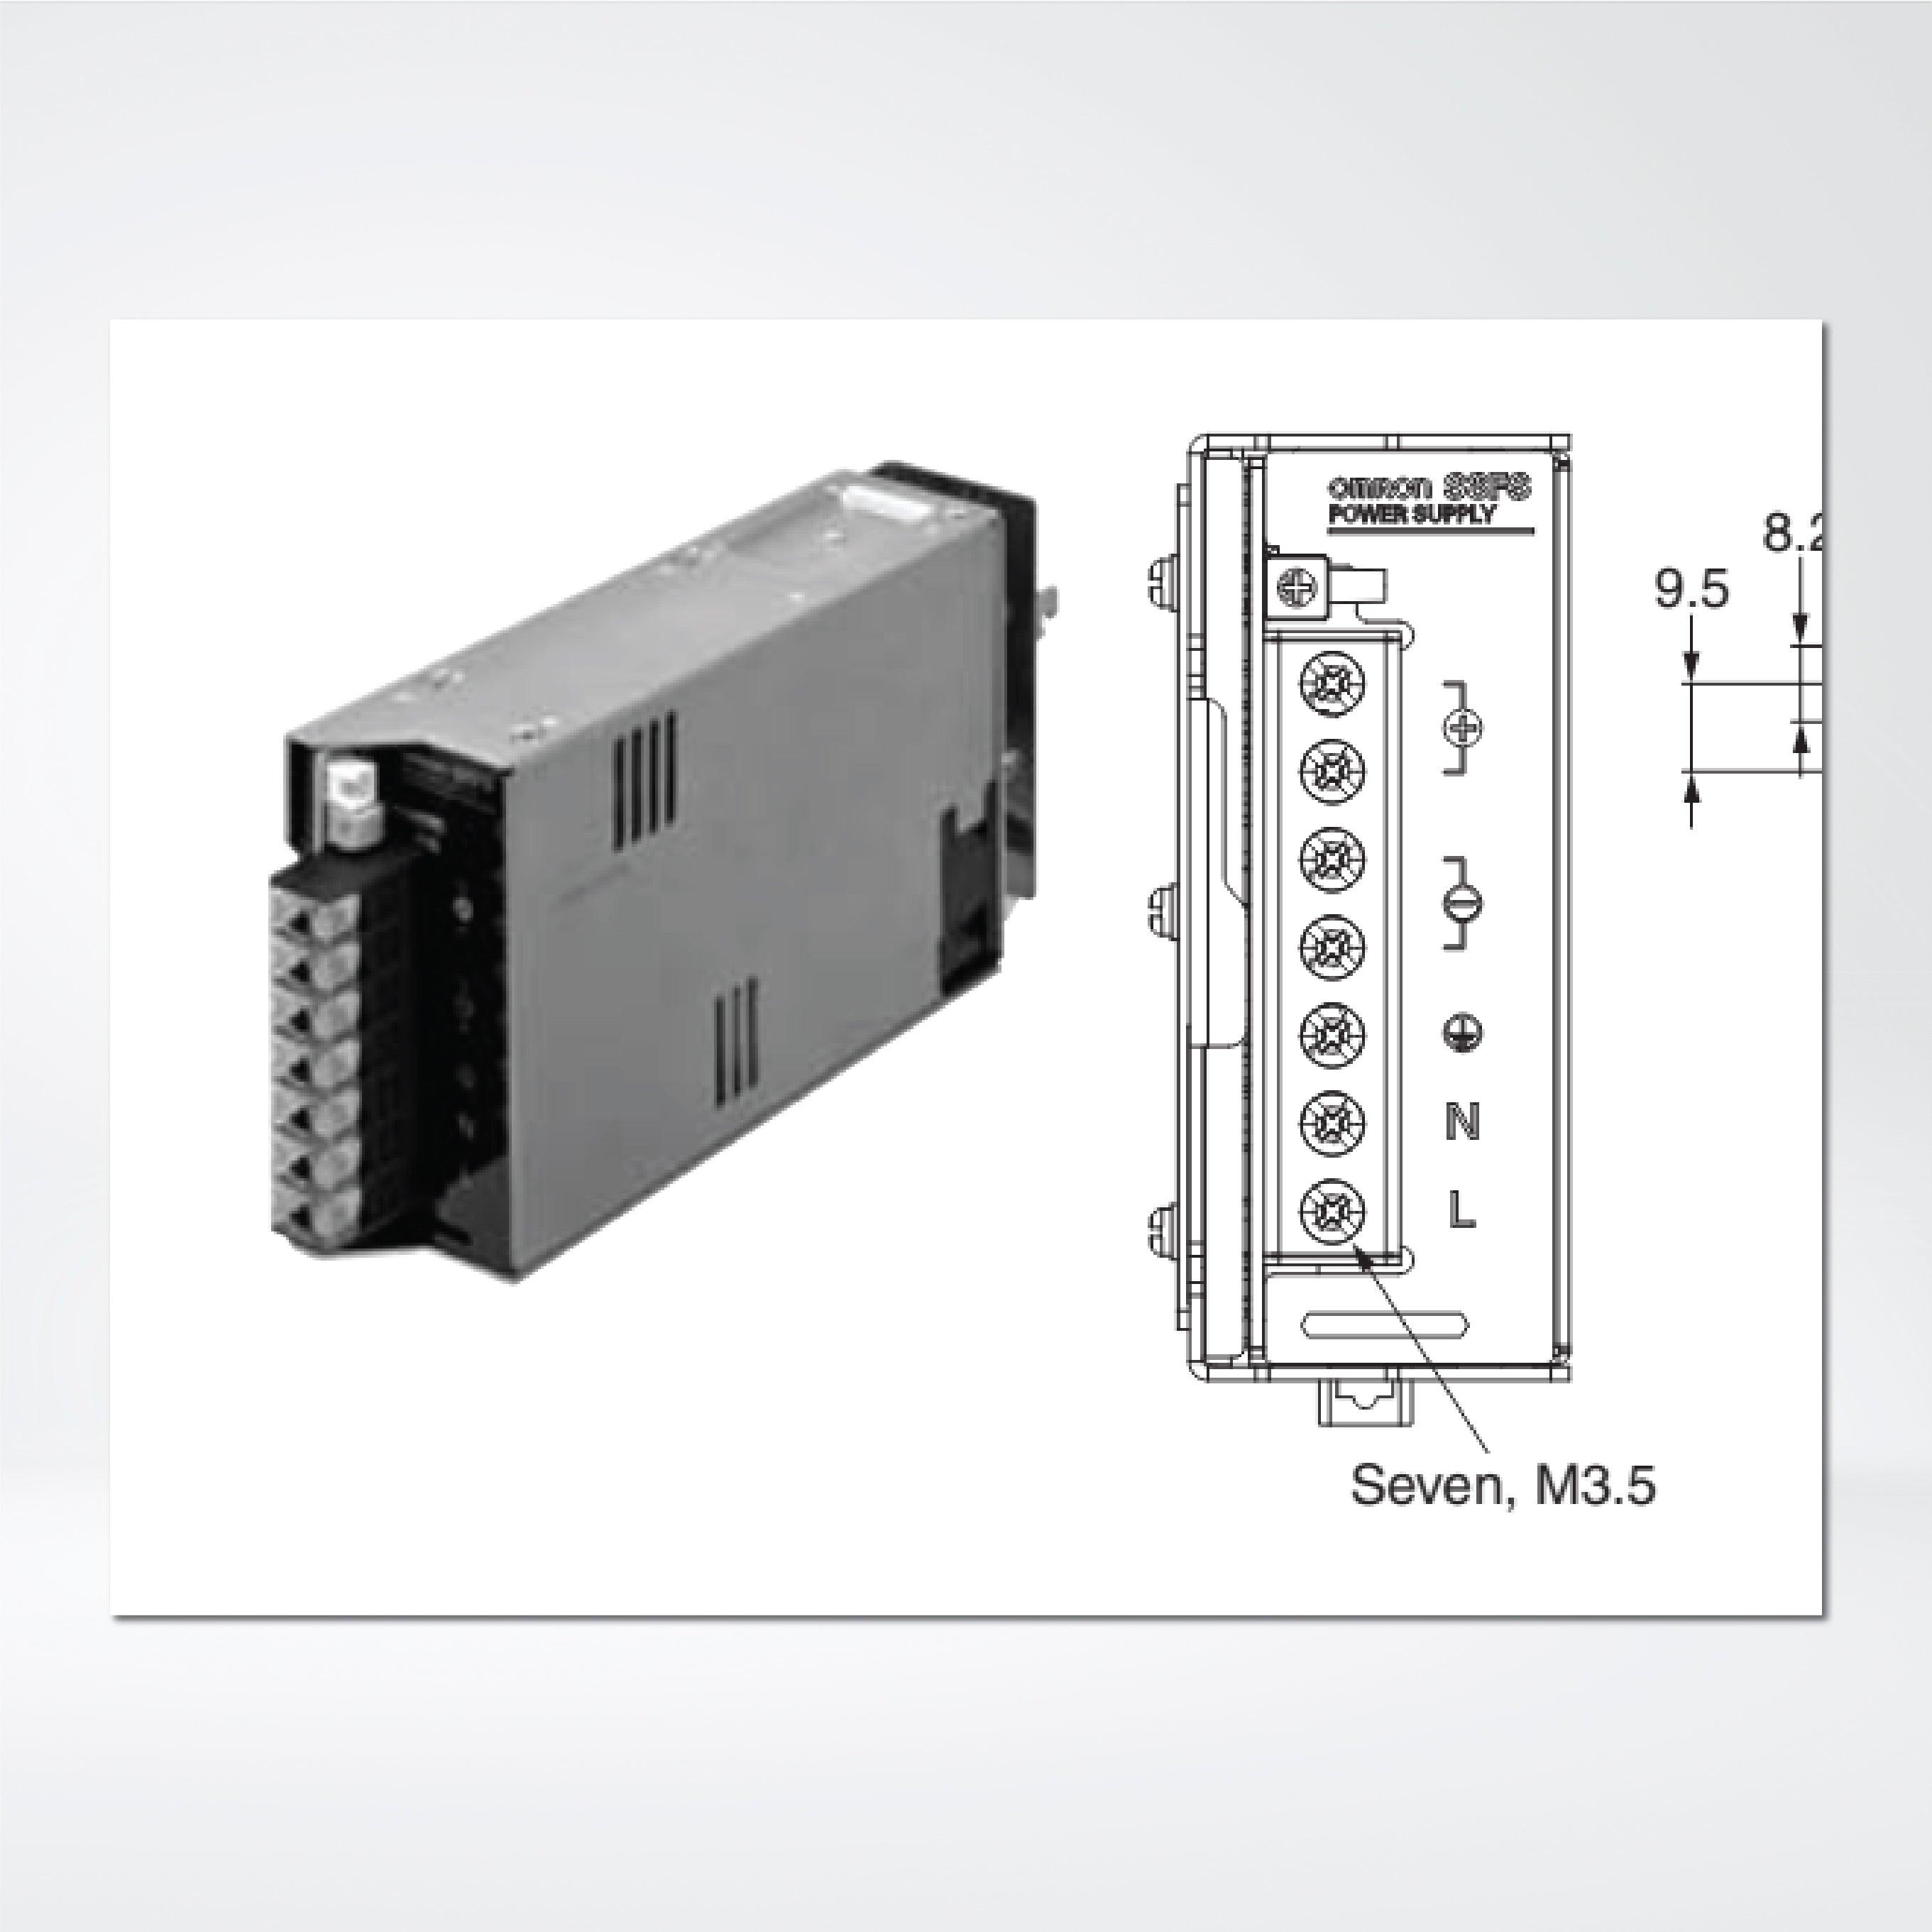 S8FS-G30015CD Switch Mode Power Supply Superior Basic Performance, 300 W, 15 VDC, DIN Rail Mounting - Riverplus